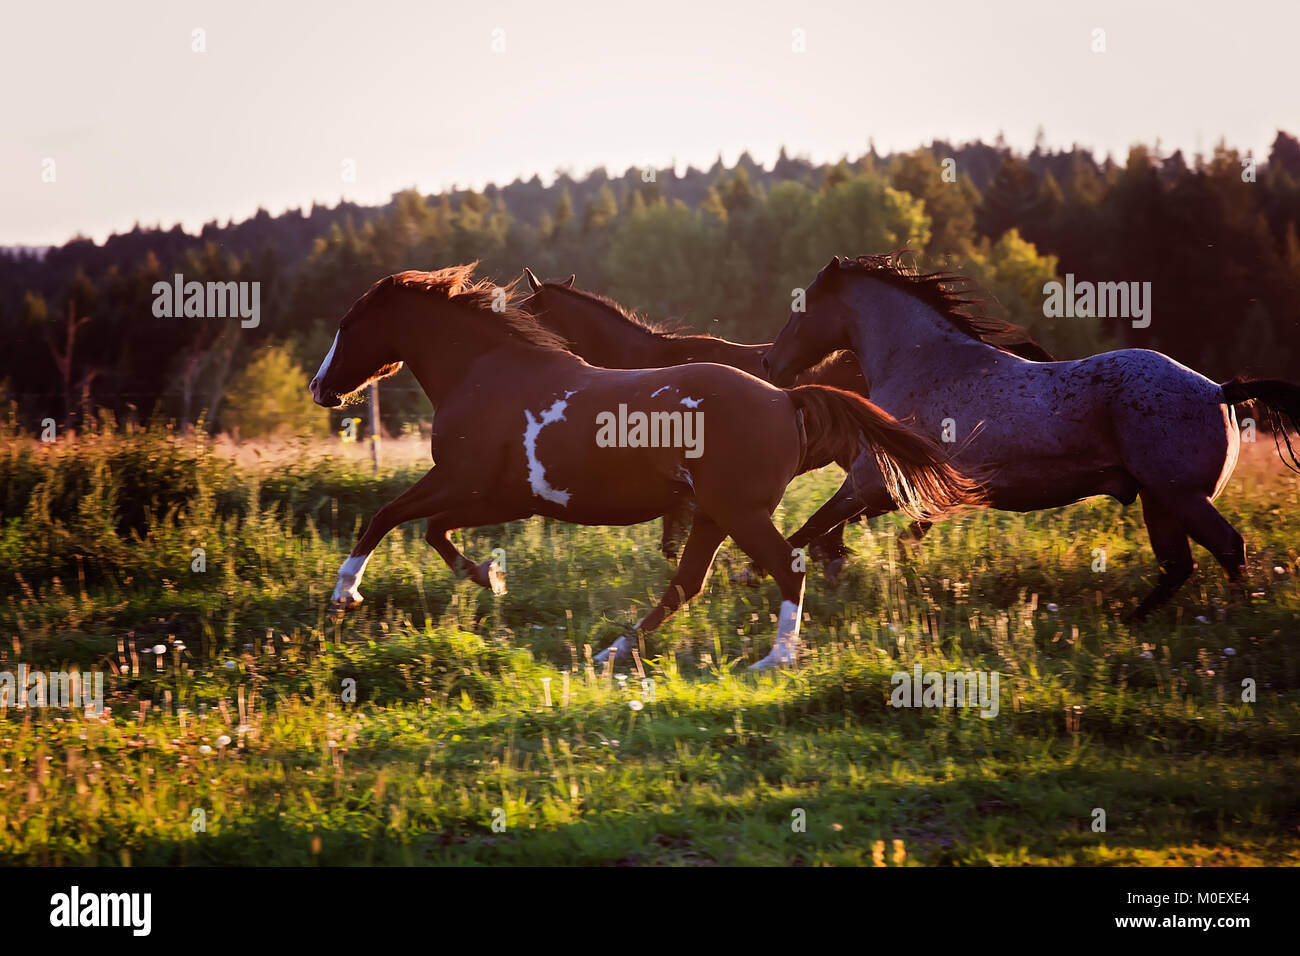 Horses running in a meadow, British Columbia, Canada Stock Photo